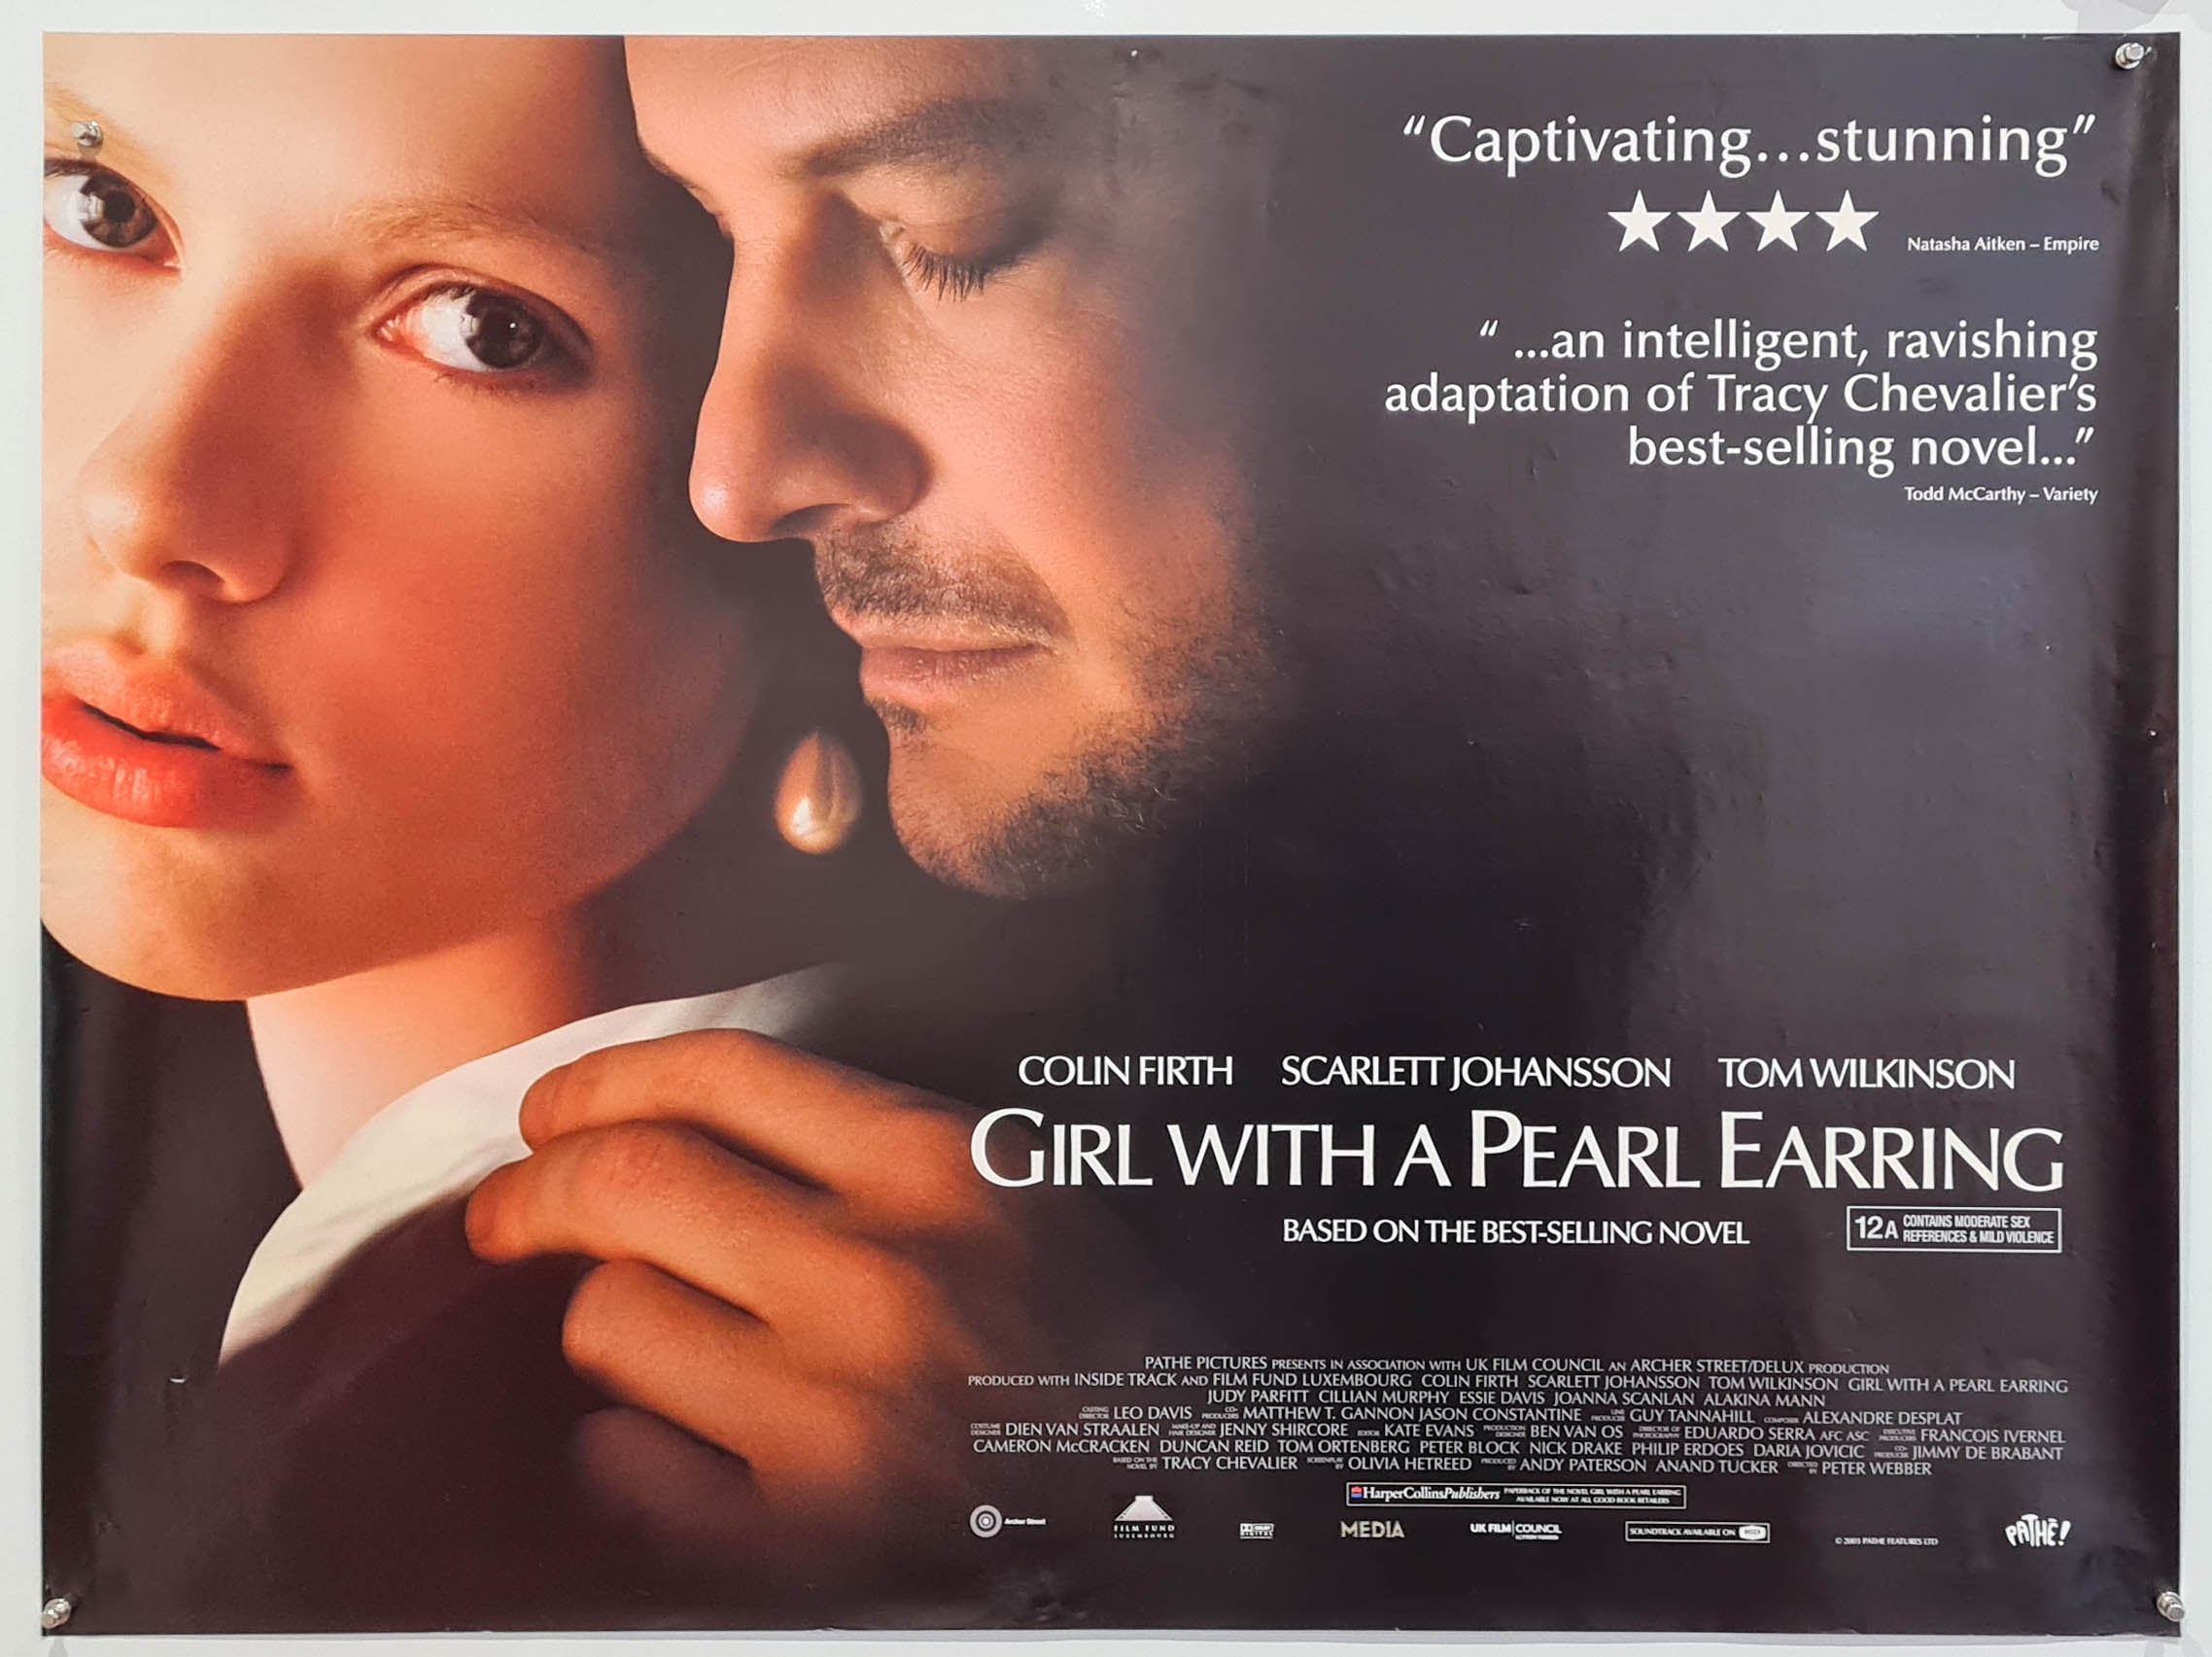 244005 Girl with a Pearl Earring Movie POSTER PRINT UK | eBay